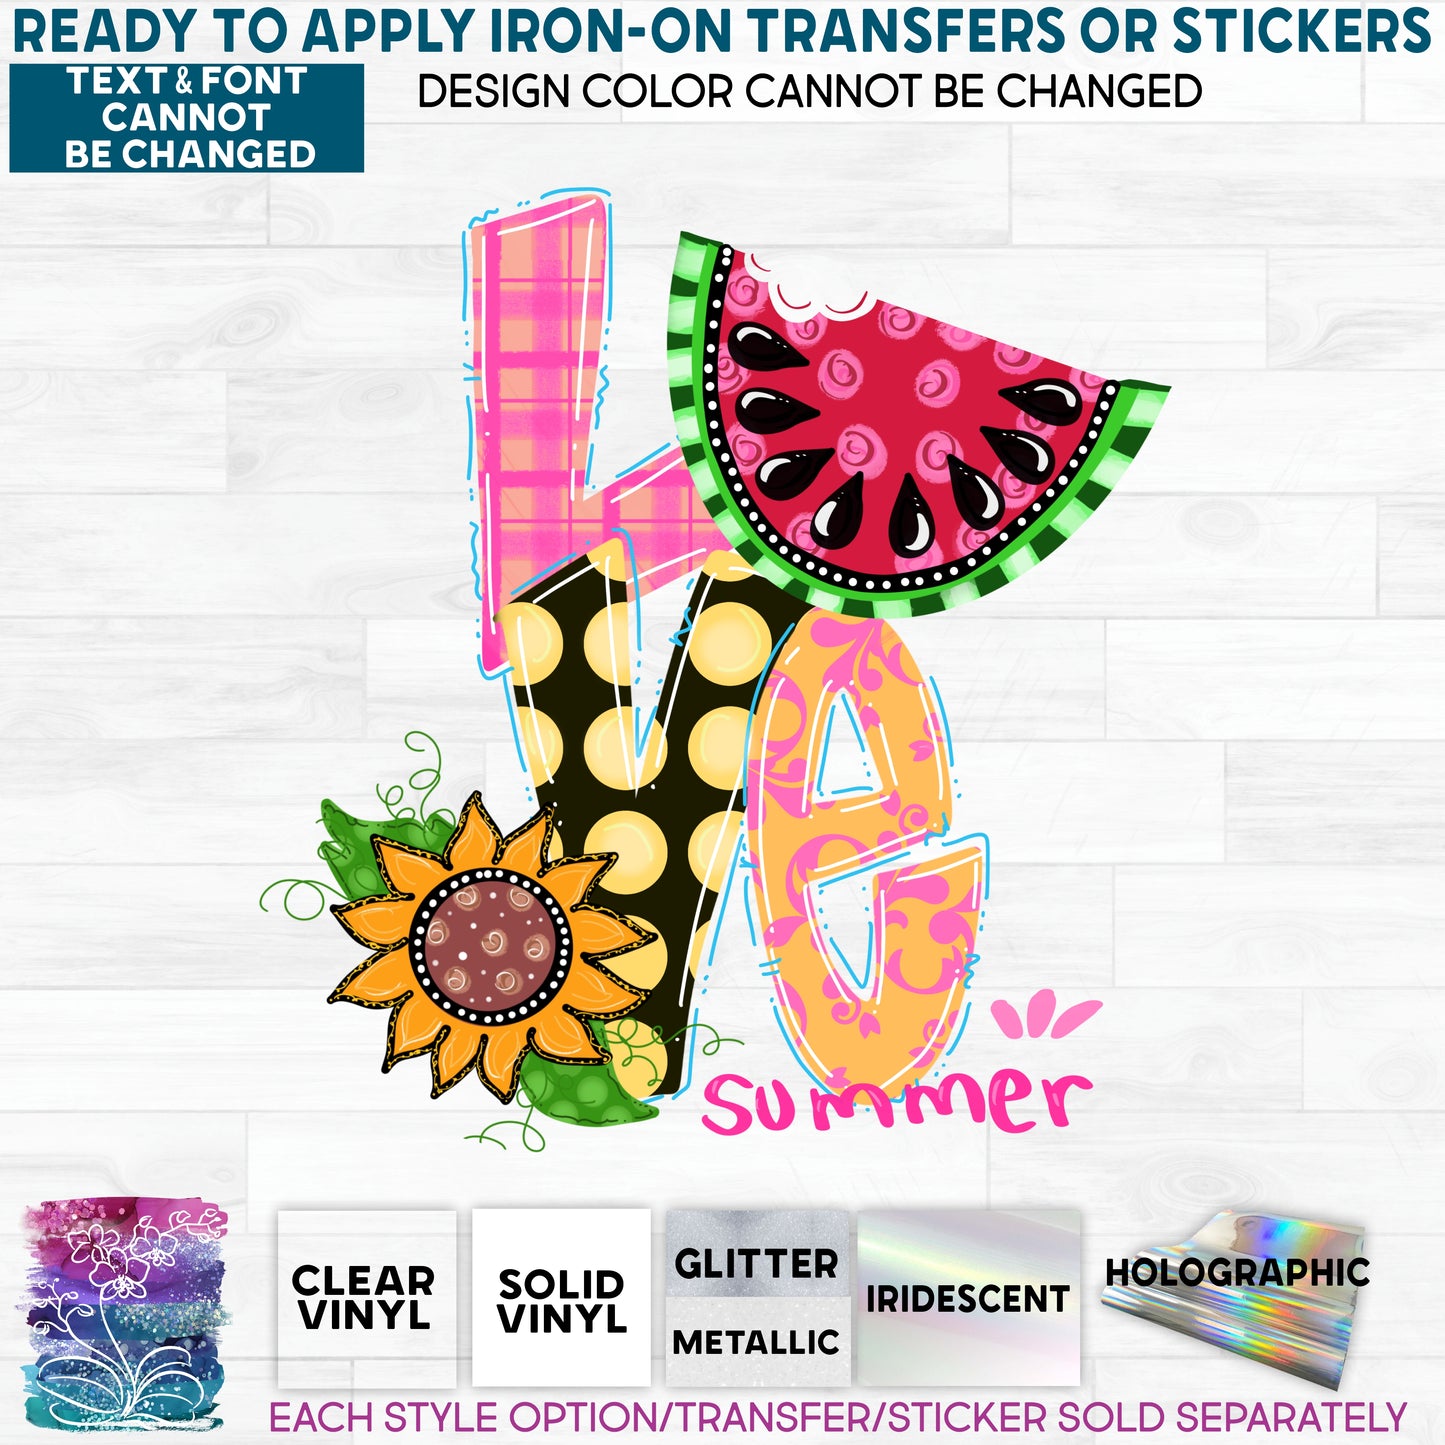 SBS-4-1D Watermelon Sunflower Red Love Summer Made-to-Order Iron-On Transfer or Sticker